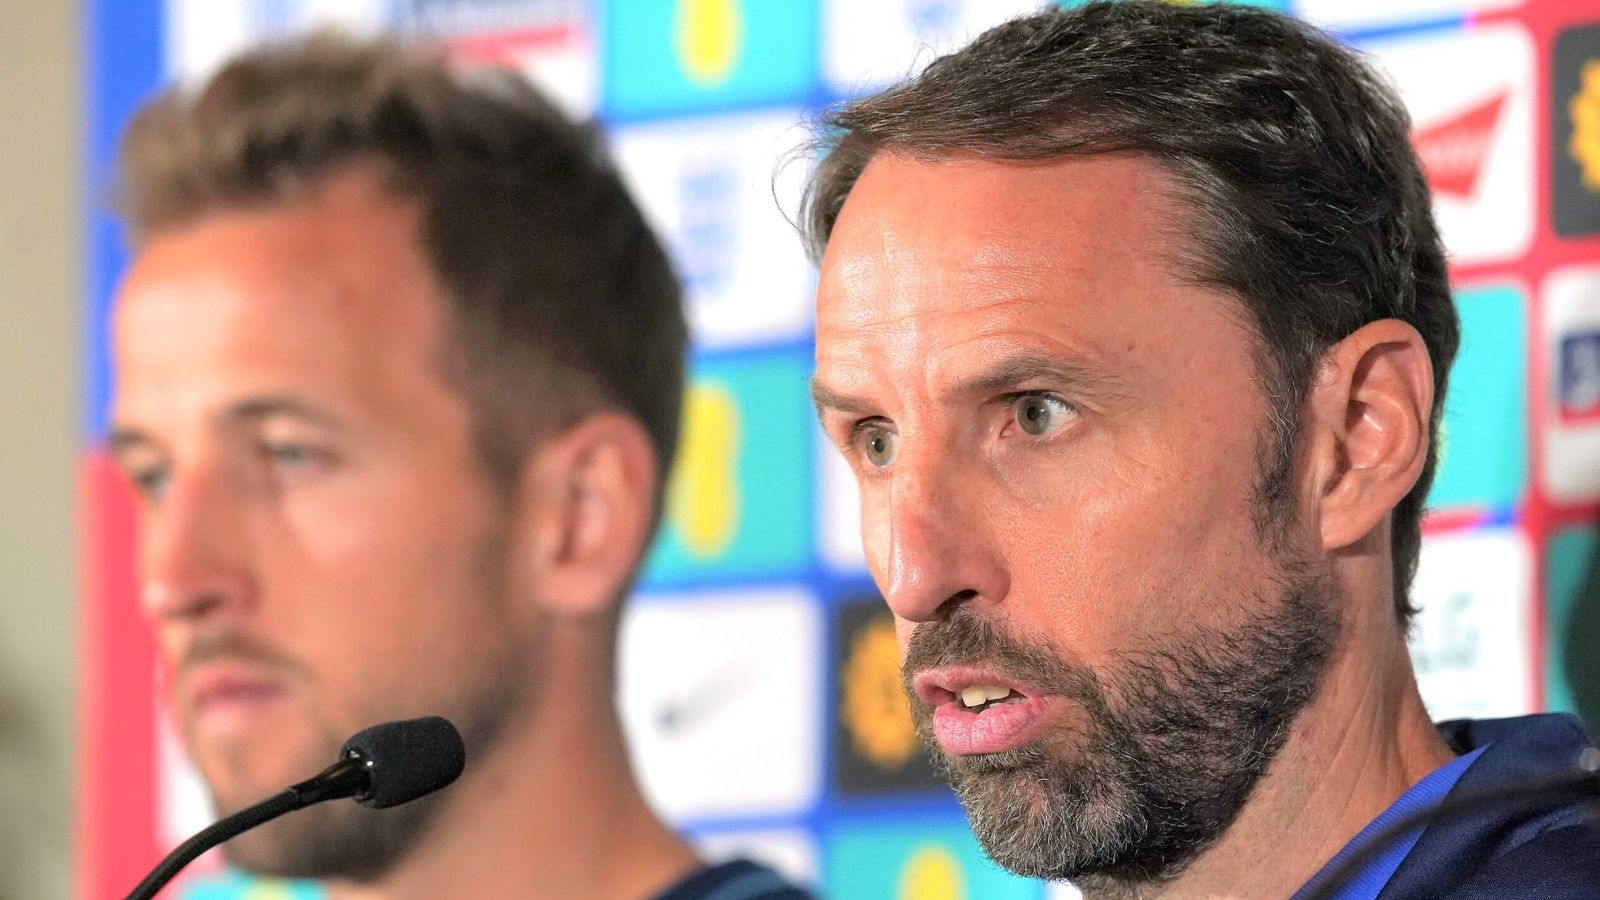 gareth-southgate-england-must-be-completely-ruthless-from-now-until-world-cup-fifa-yet-to-sanction-onelove-armband